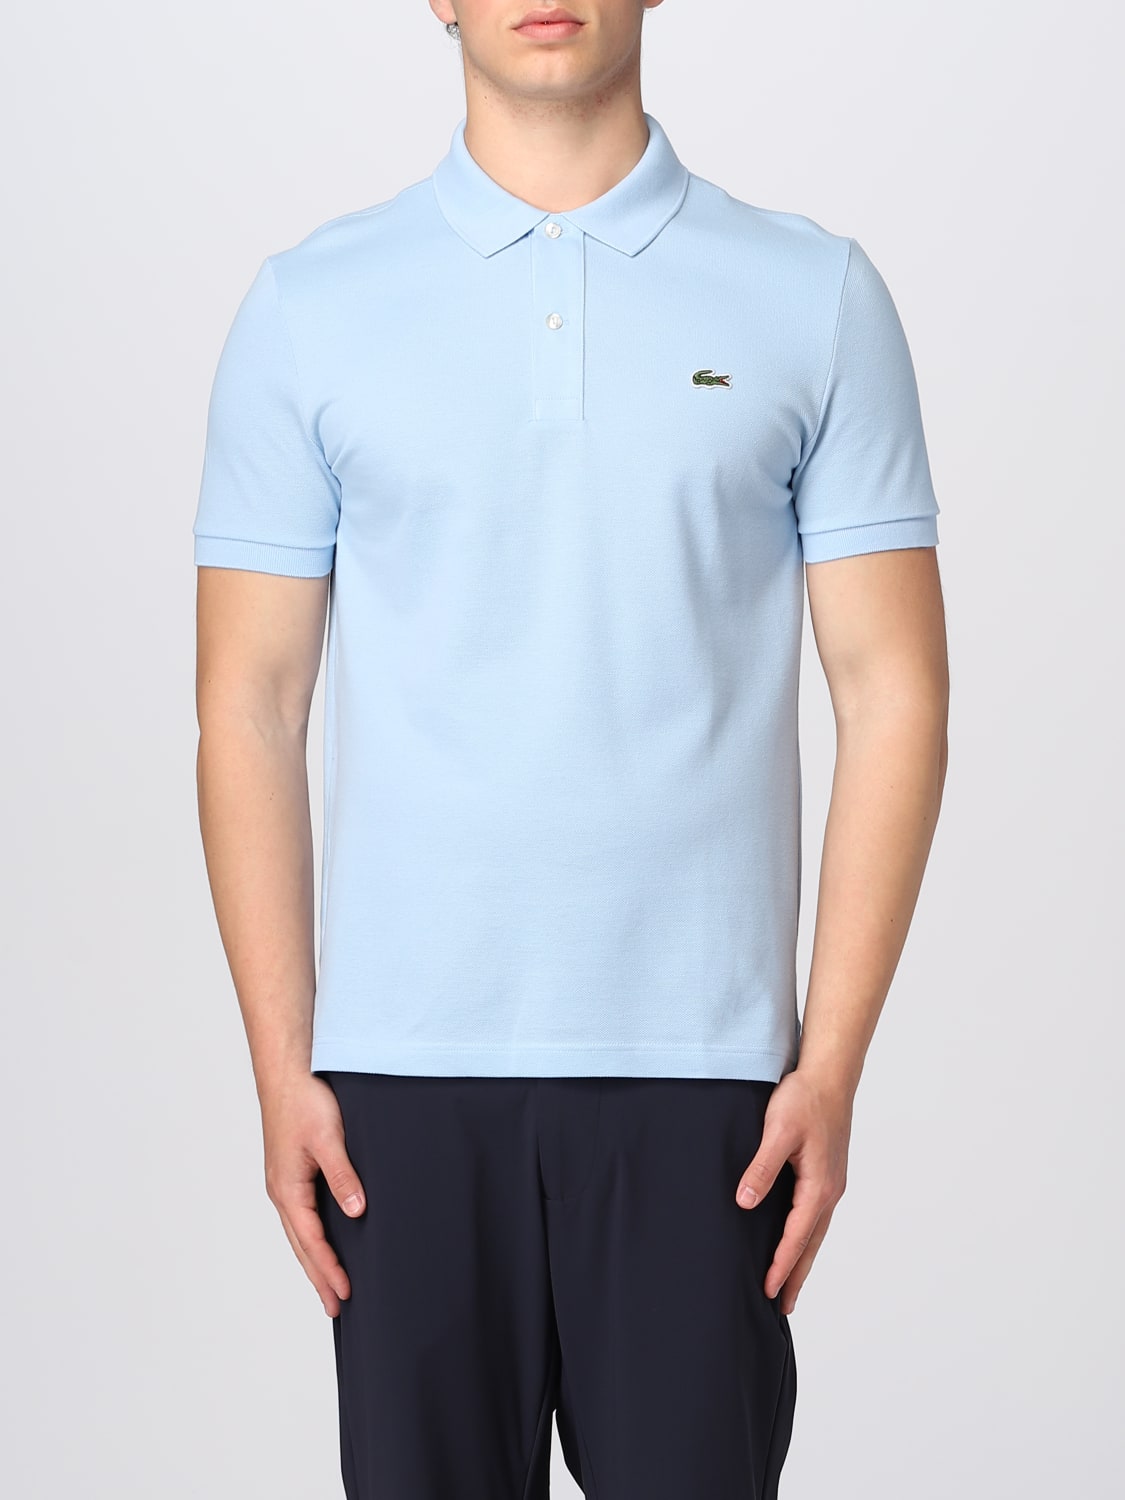 LACOSTE: shirt for Sky Blue | Lacoste polo shirt PH4012 online at GIGLIO.COM